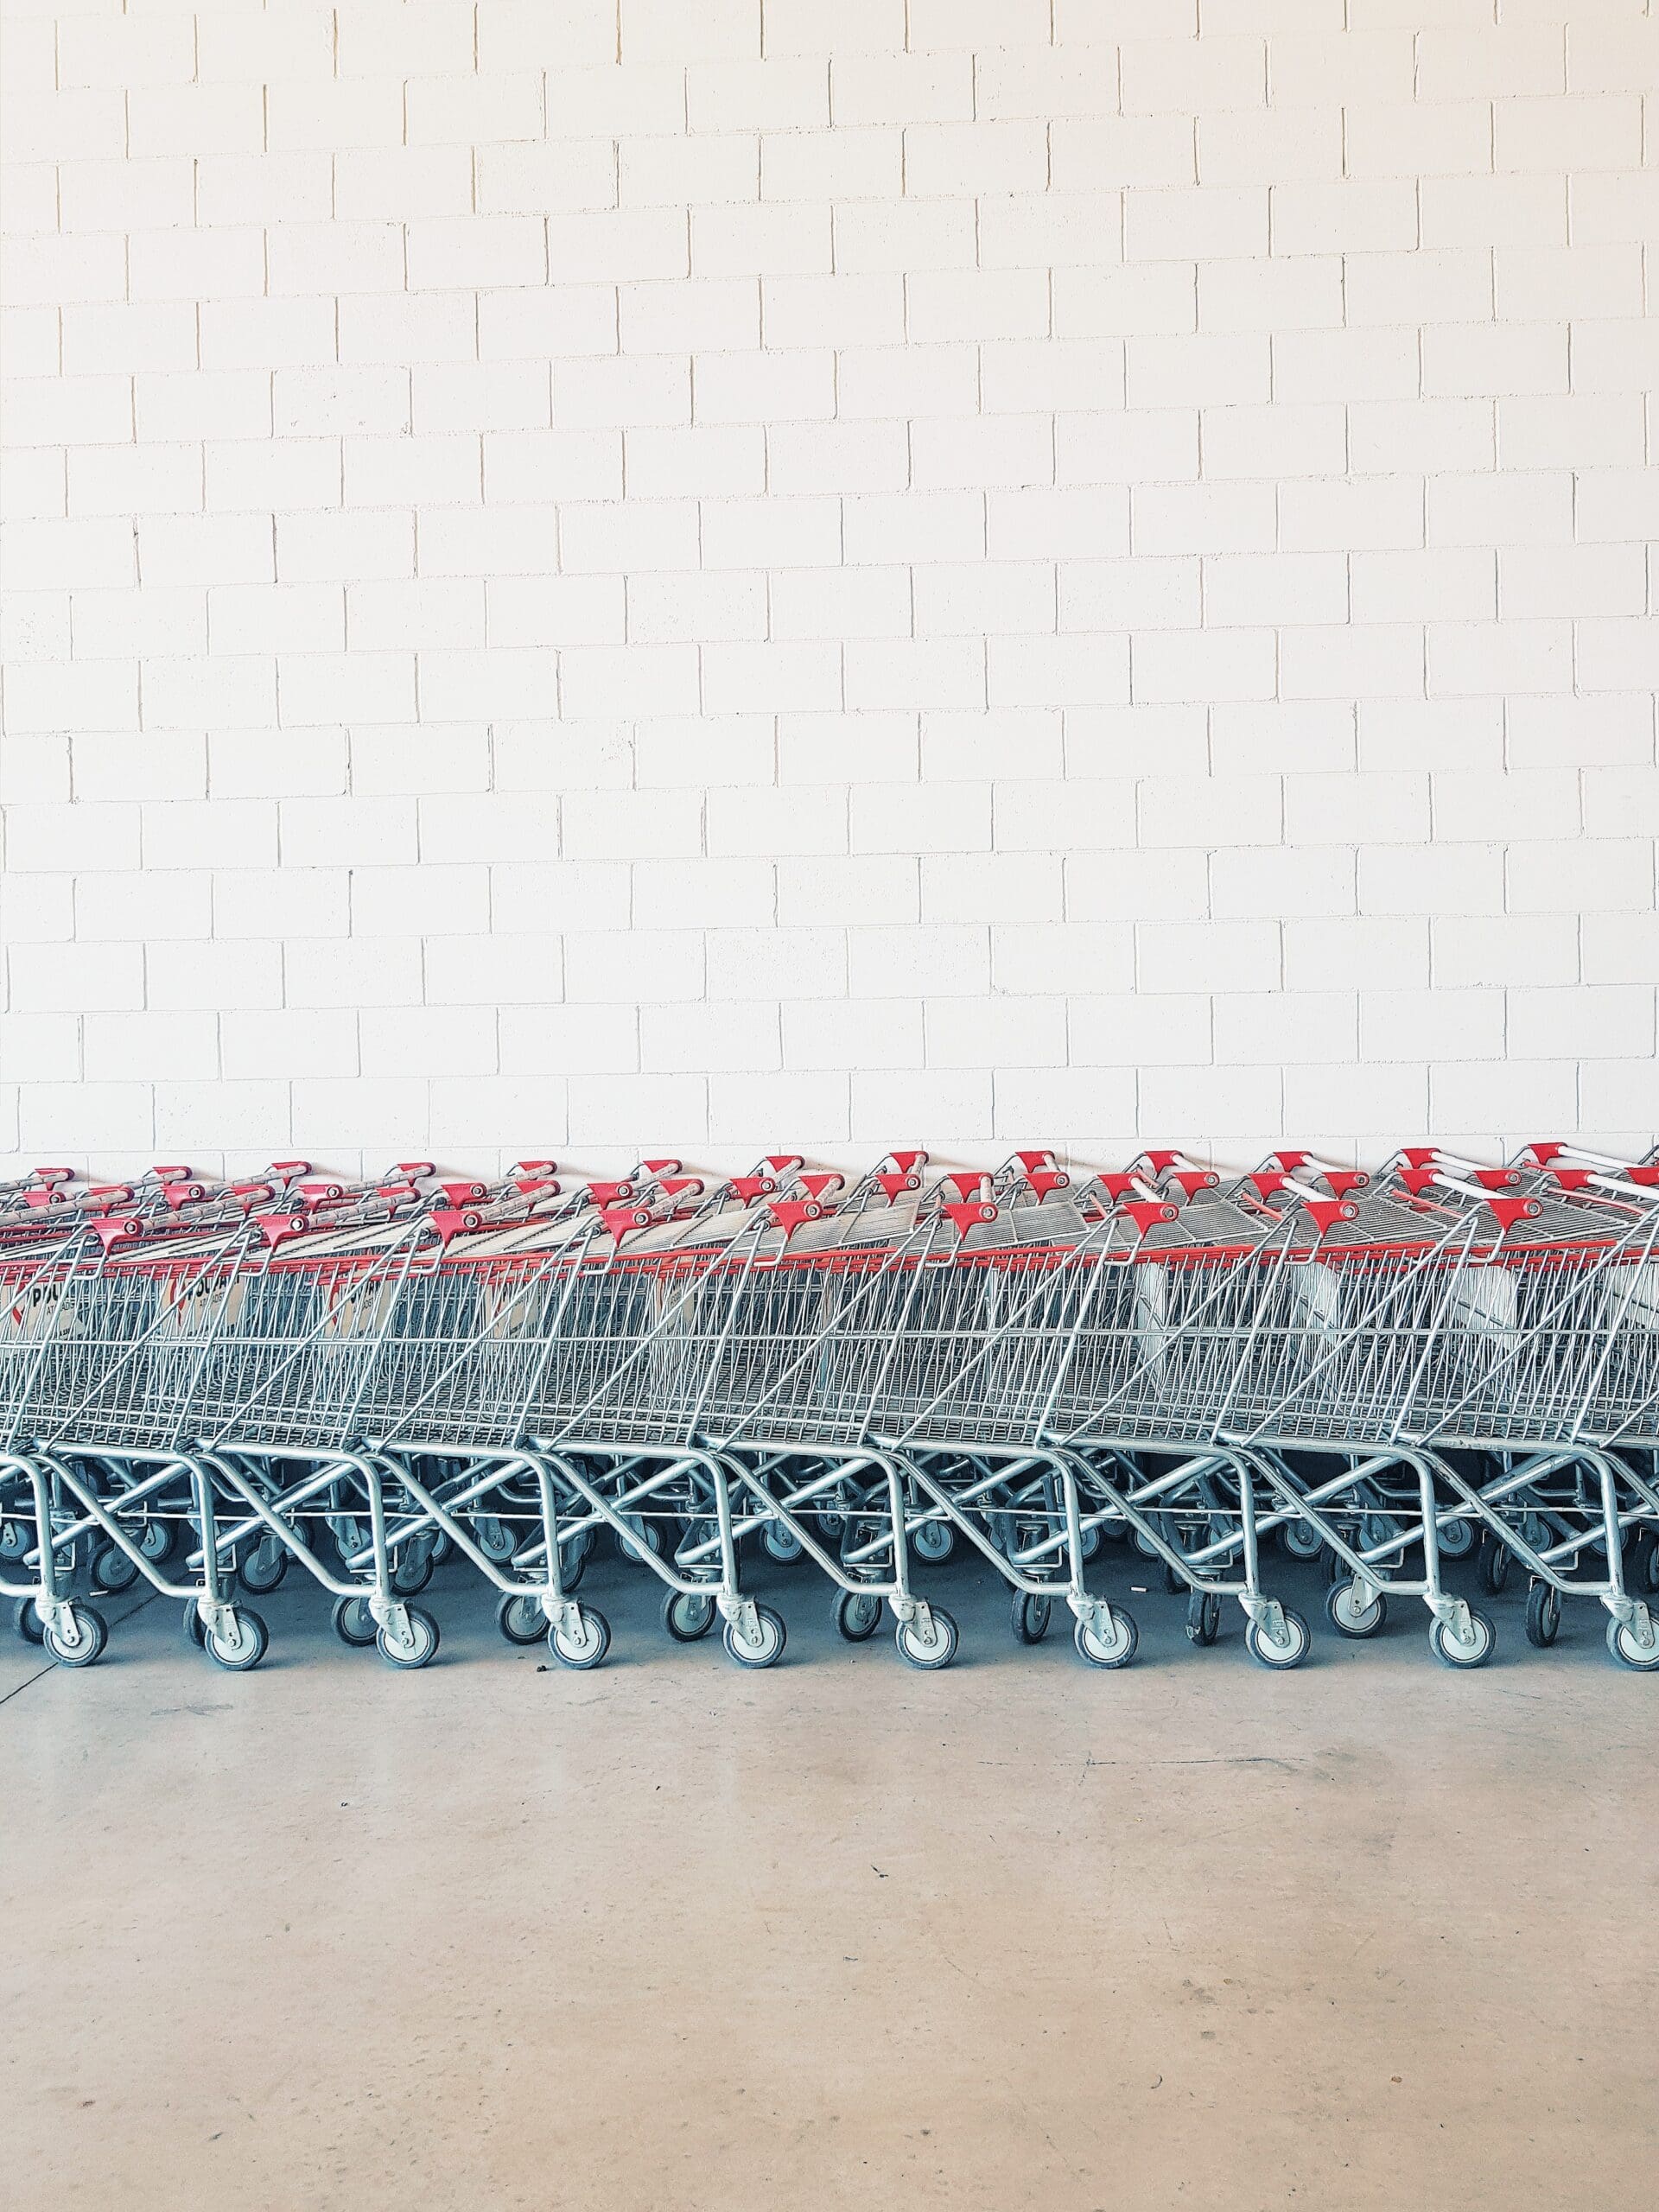 Shopping carts lined up representing the concept of pricing strategies.